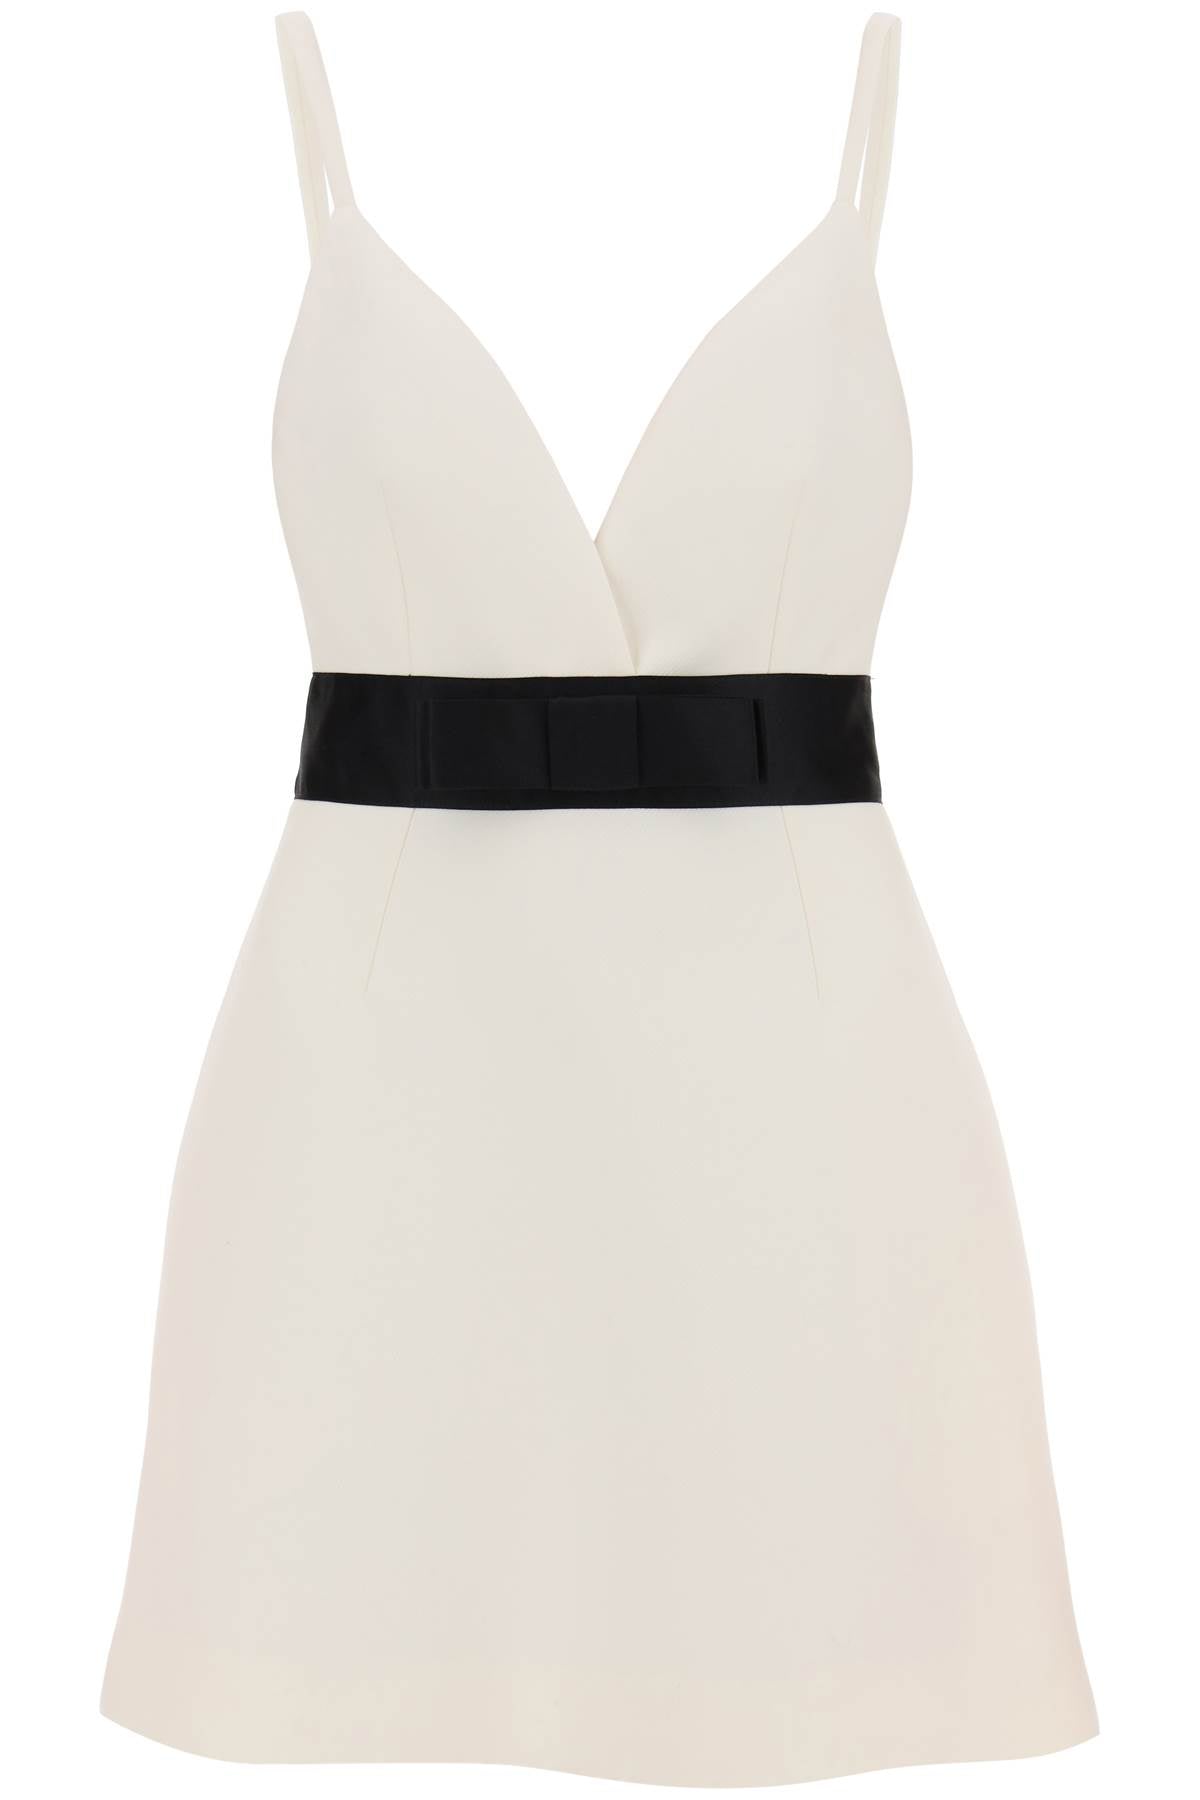 DOLCE & GABBANA Mini White Wool Dress with Decorative Bow and Pockets for Women